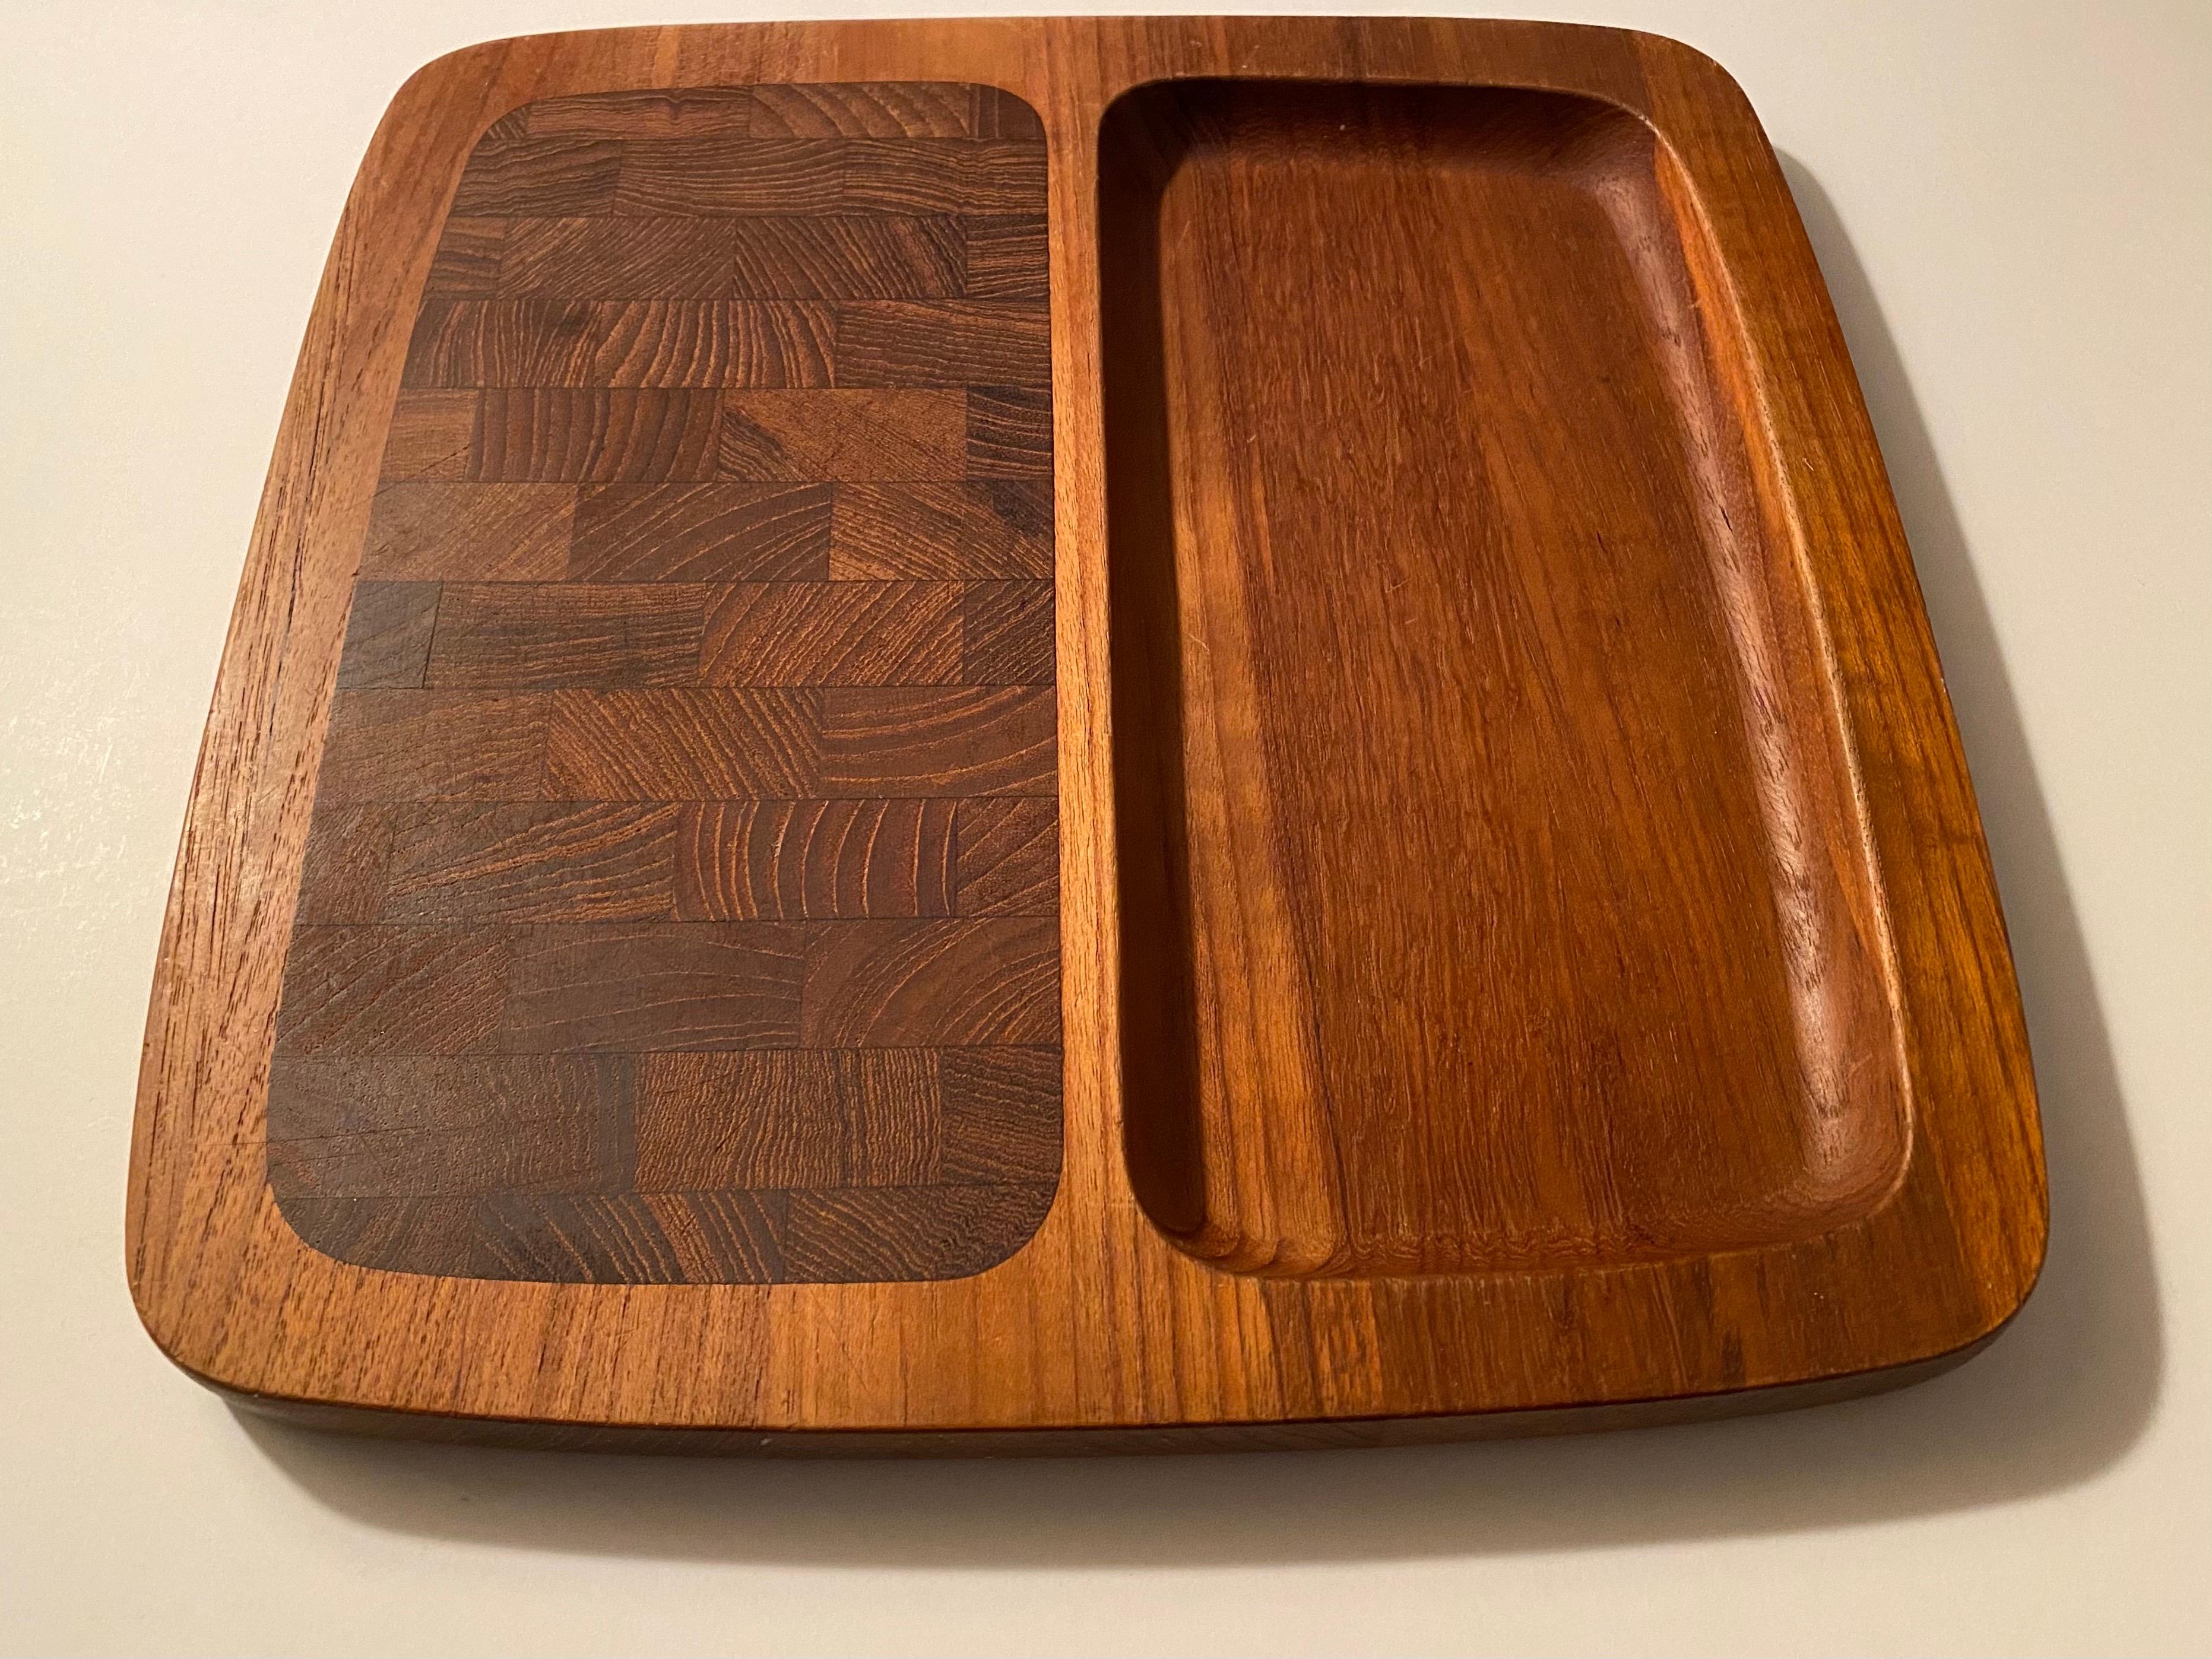 A divided teak wood tray with an end-grain teak cutting surface and a recessed section, designed by Jens H. Quistgaard for Dansk. Branded 